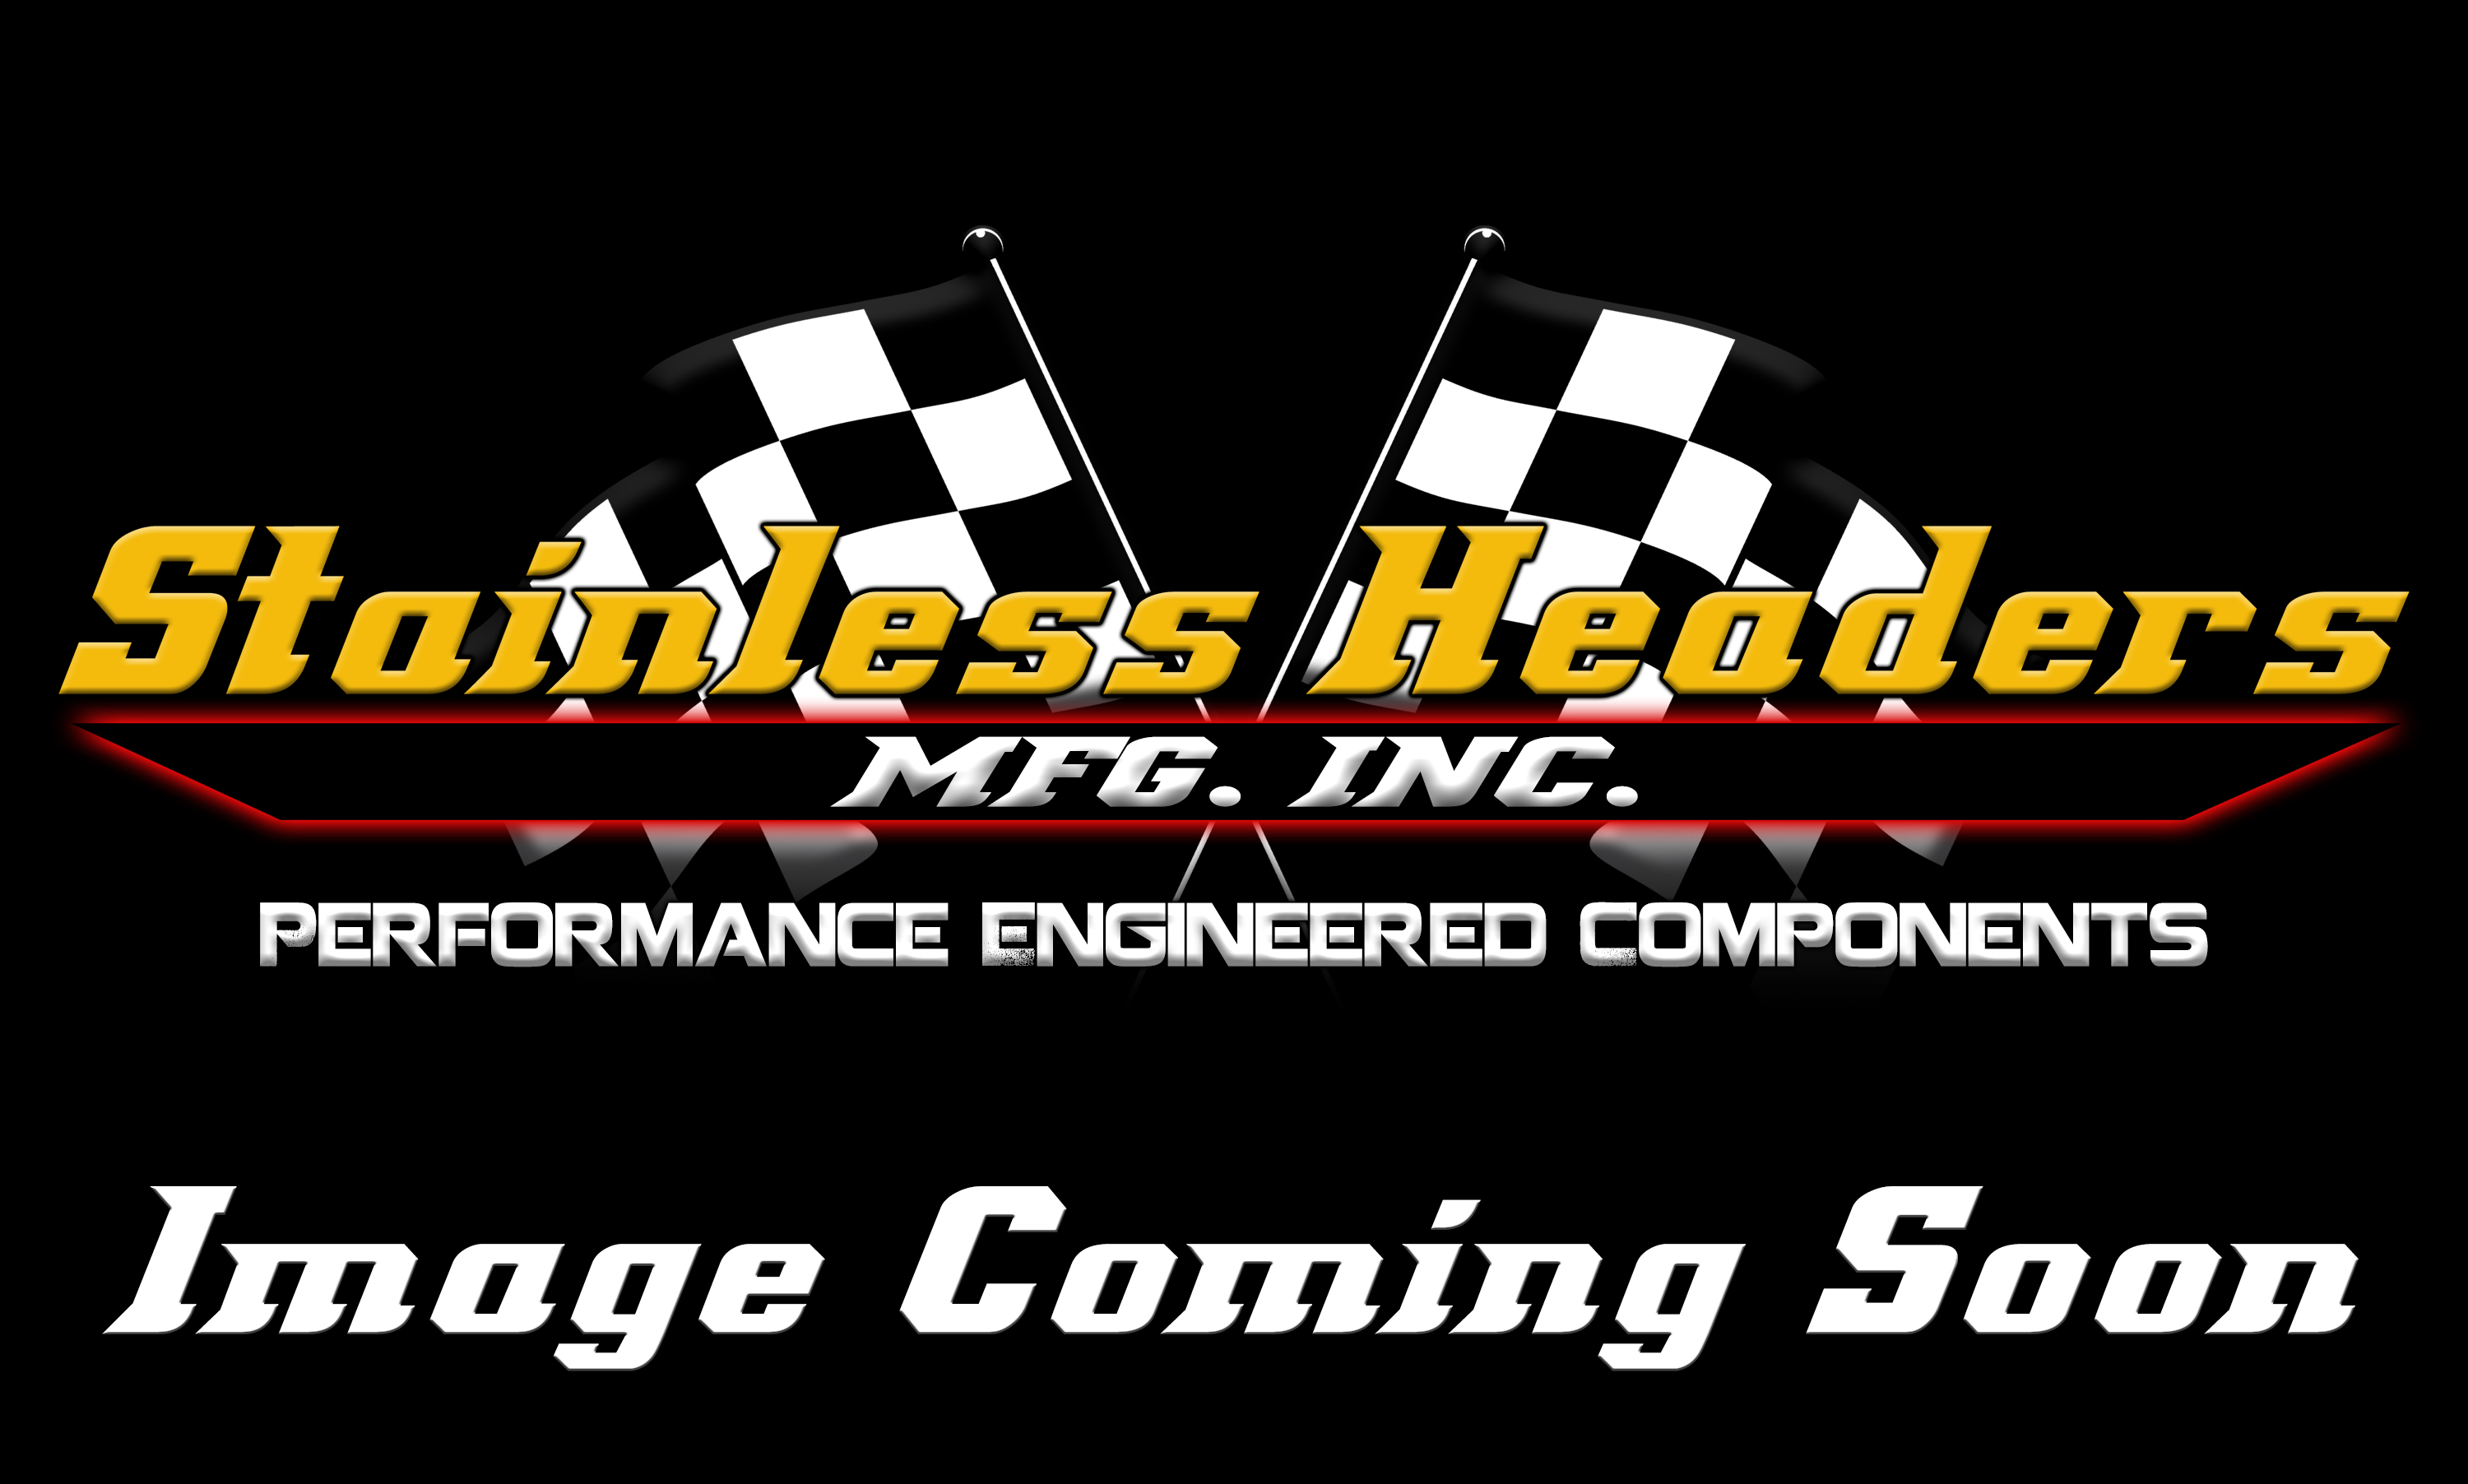 Stainless Headers - 2 1/2" Primary 4 into 1 Performance Merge Collector-16ga 304ss - Image 2